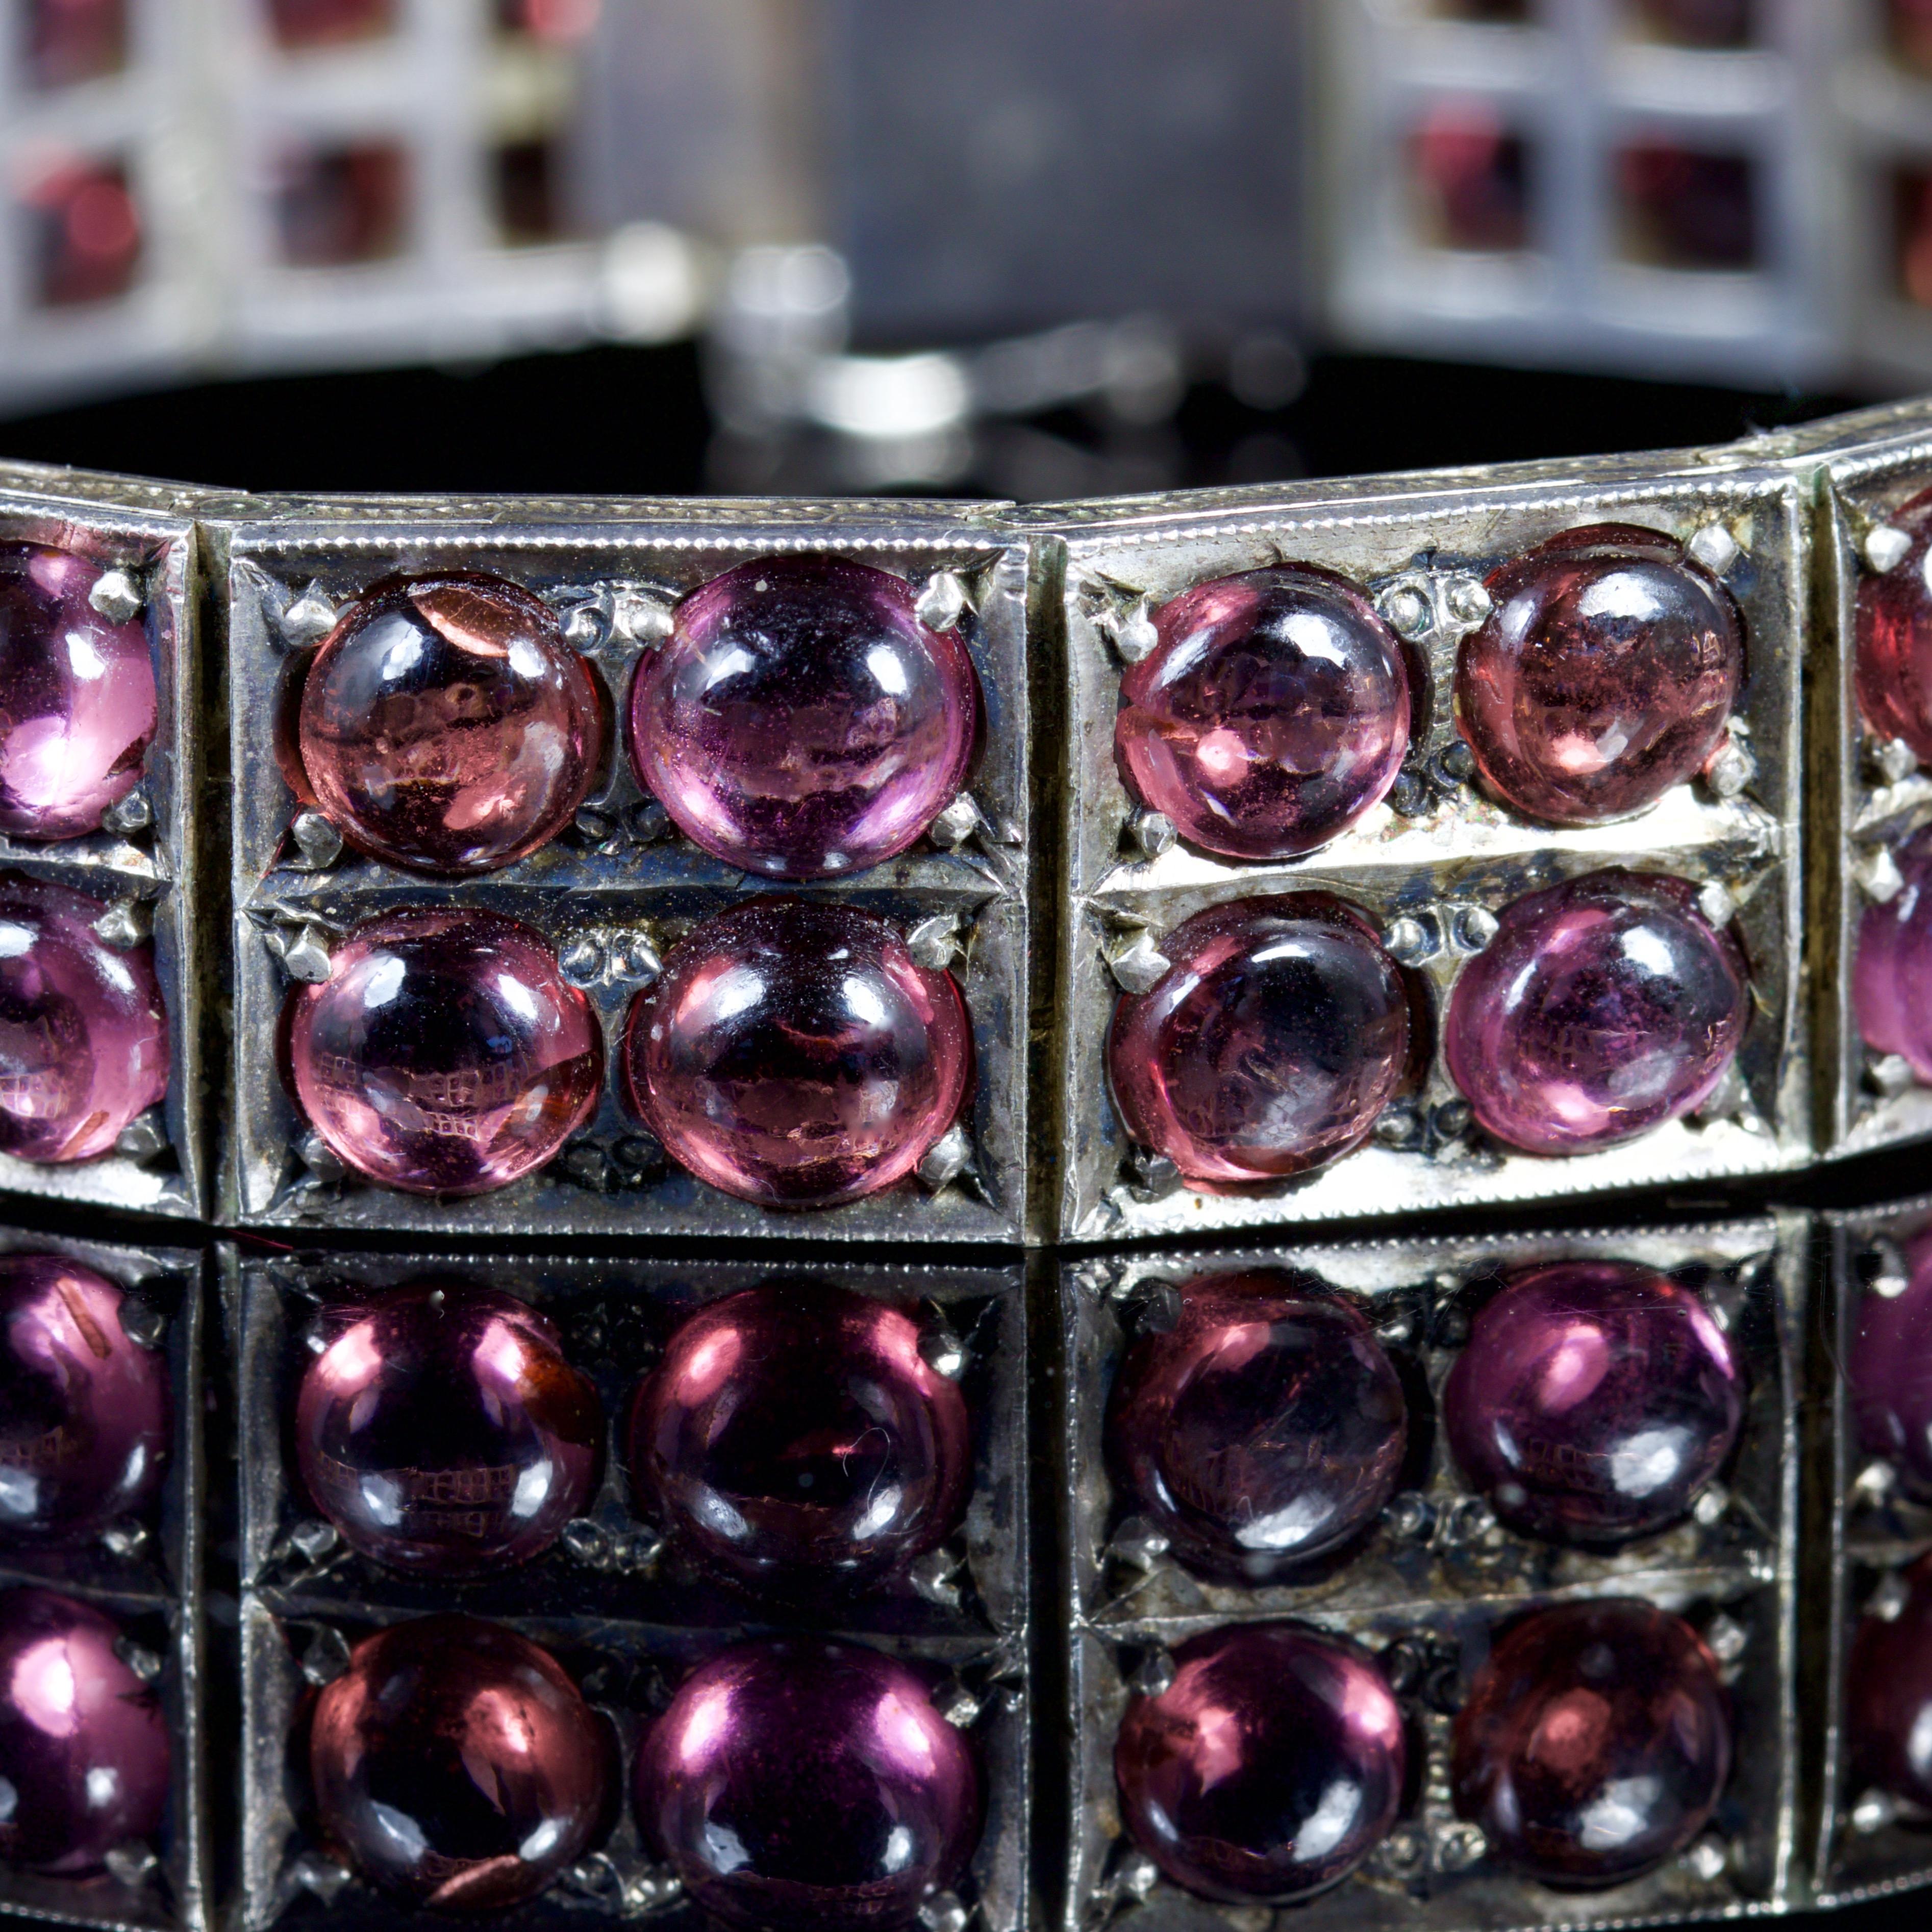 This fabulous Victorian Silver Garnet bracelet is Circa 1880.

The bracelet is adorned with beautiful Almandine Garnets which are set into each panel.

There is over 30ct of Almandine Garnets set into this beautiful bracelet.

Each Garnet is